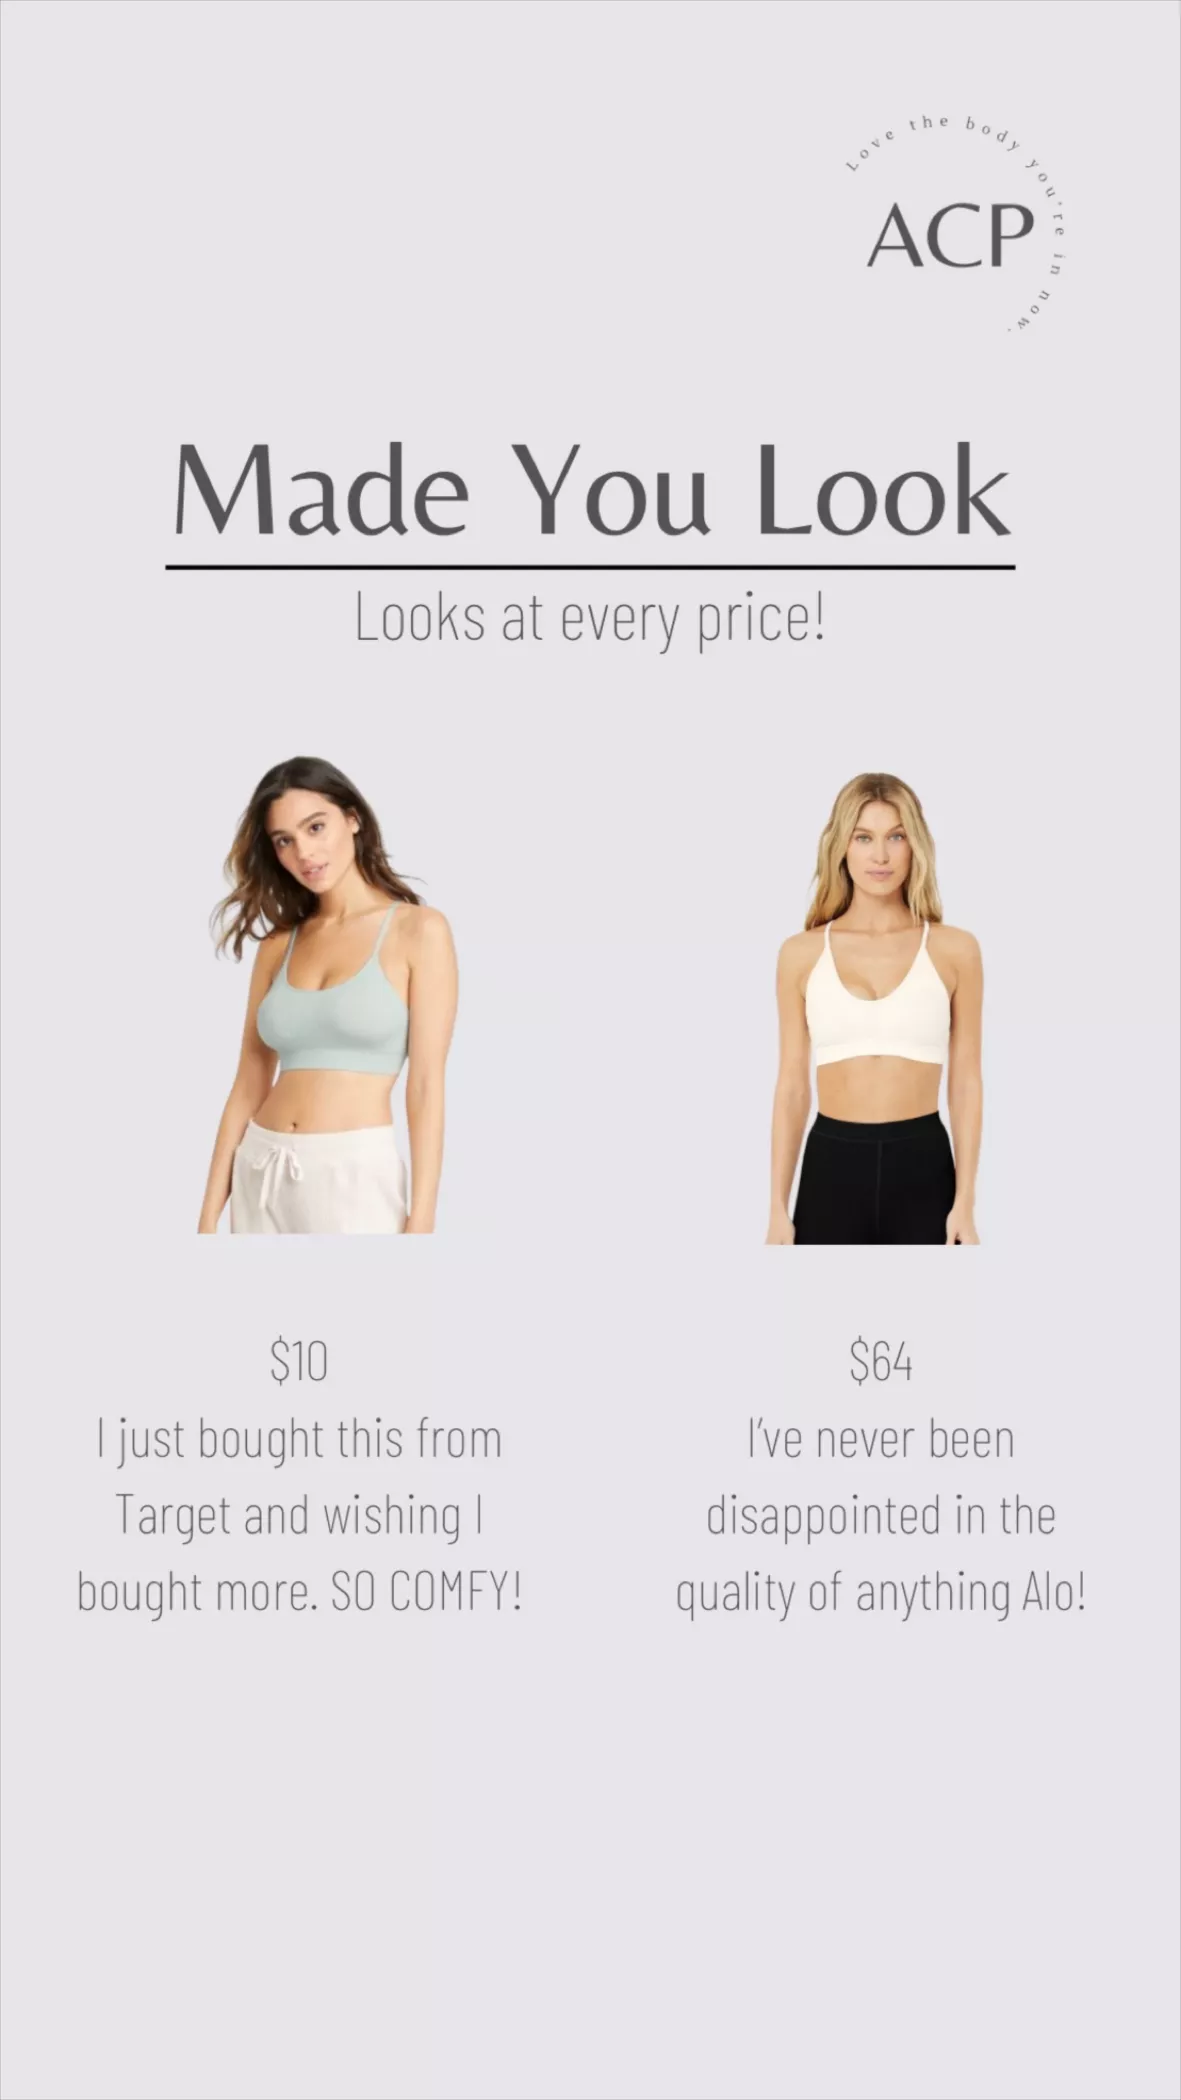 These Are the Comfortable and Super Soft Bralettes Women